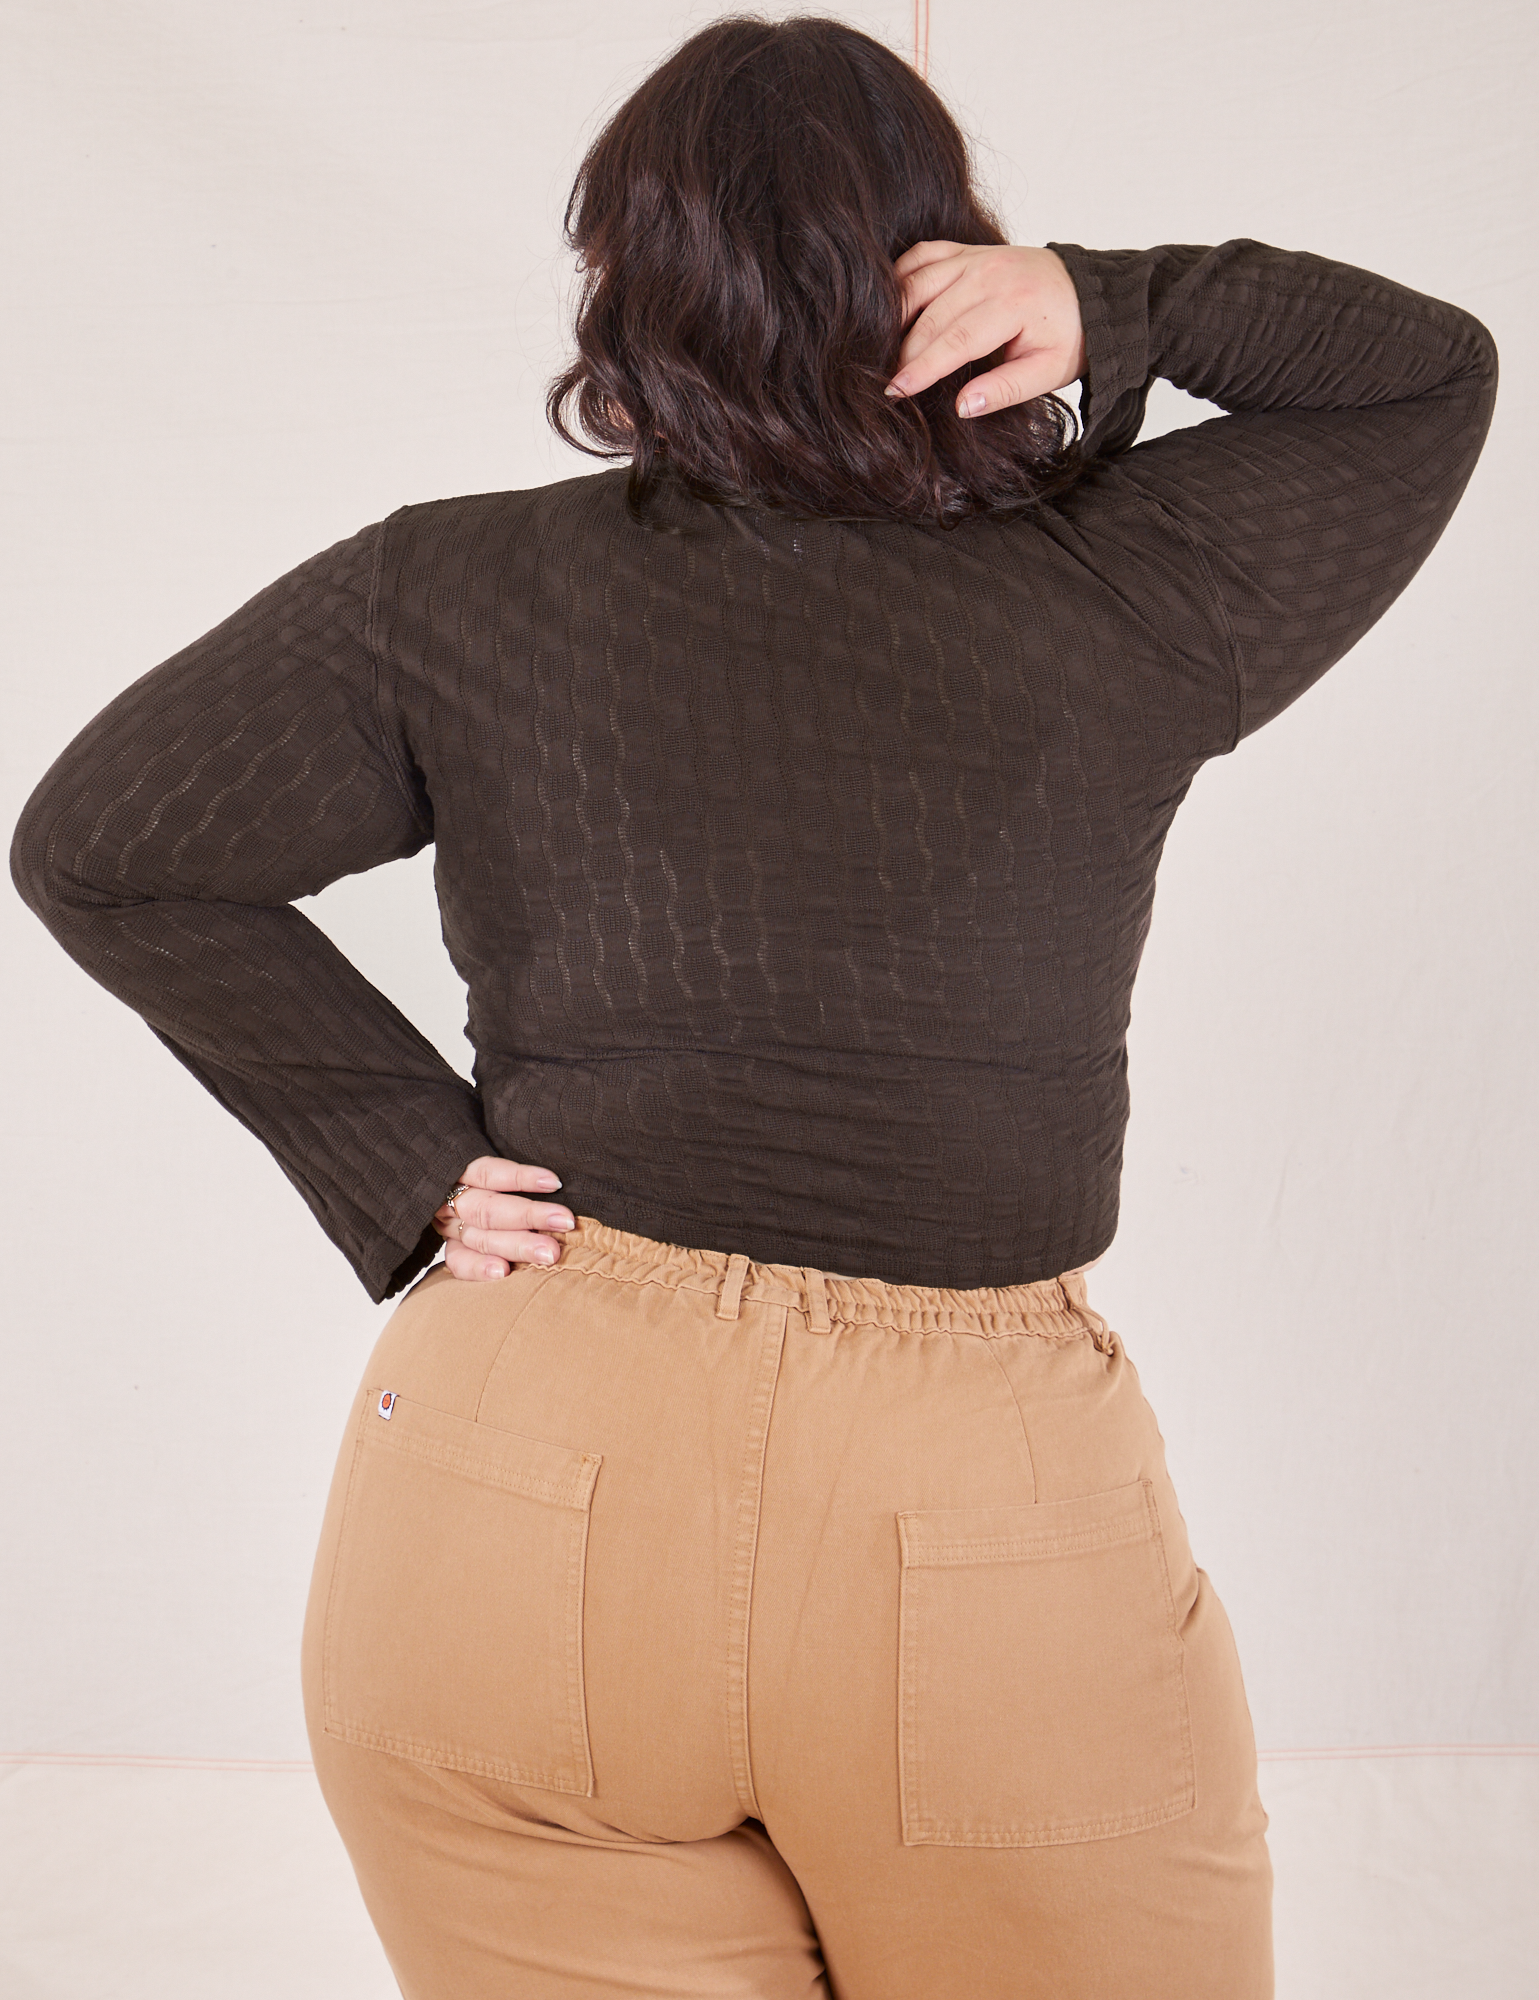 Back view of Bell Sleeve Top in Espresso Brown and tan Work Pants worn by Ashley